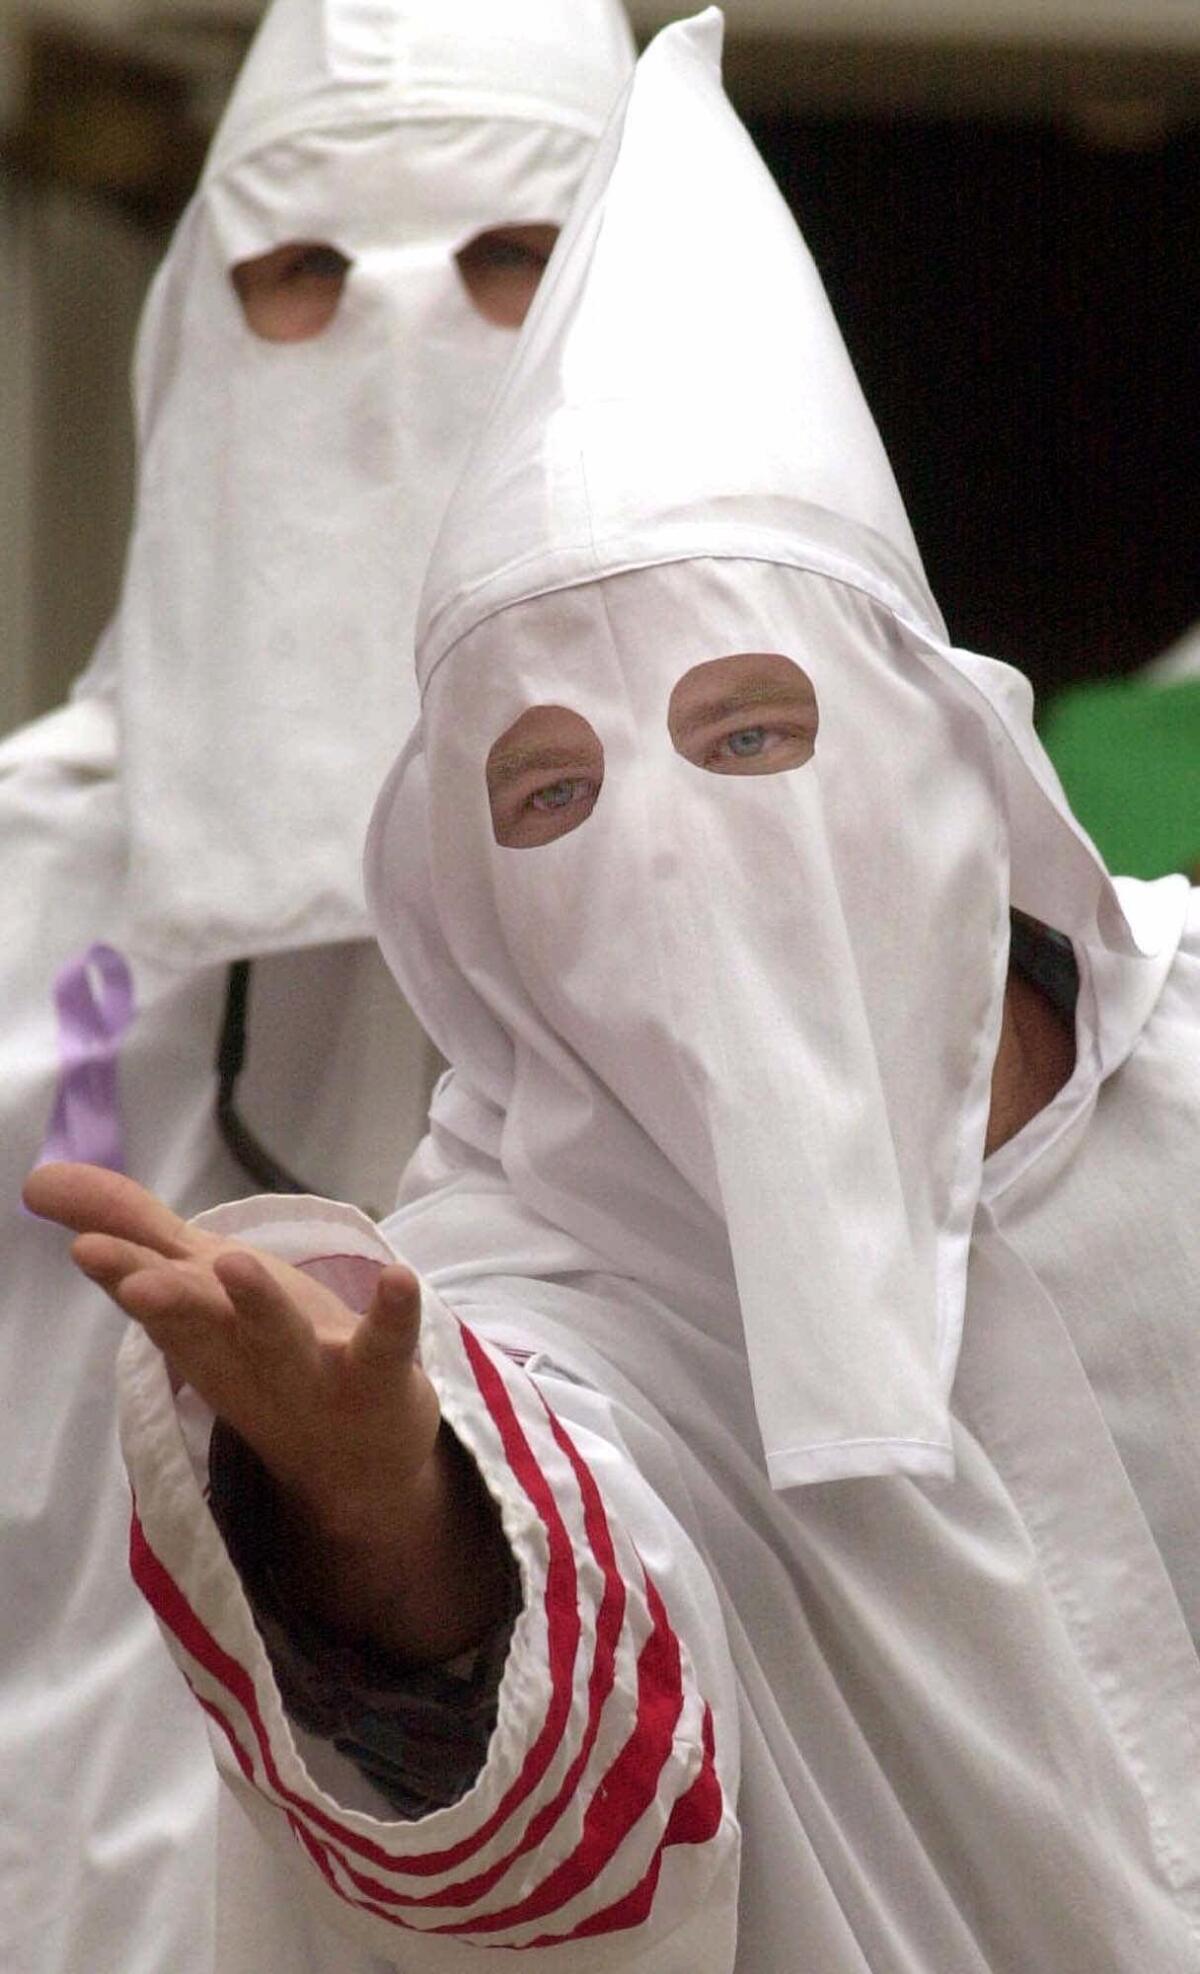 A hooded Ku Klux Klan member taunts the crowd during a rally in 2000 in downtown Carlisle, Pa. The Southern Poverty Law Center reported that such hate groups were in decline in 2013.